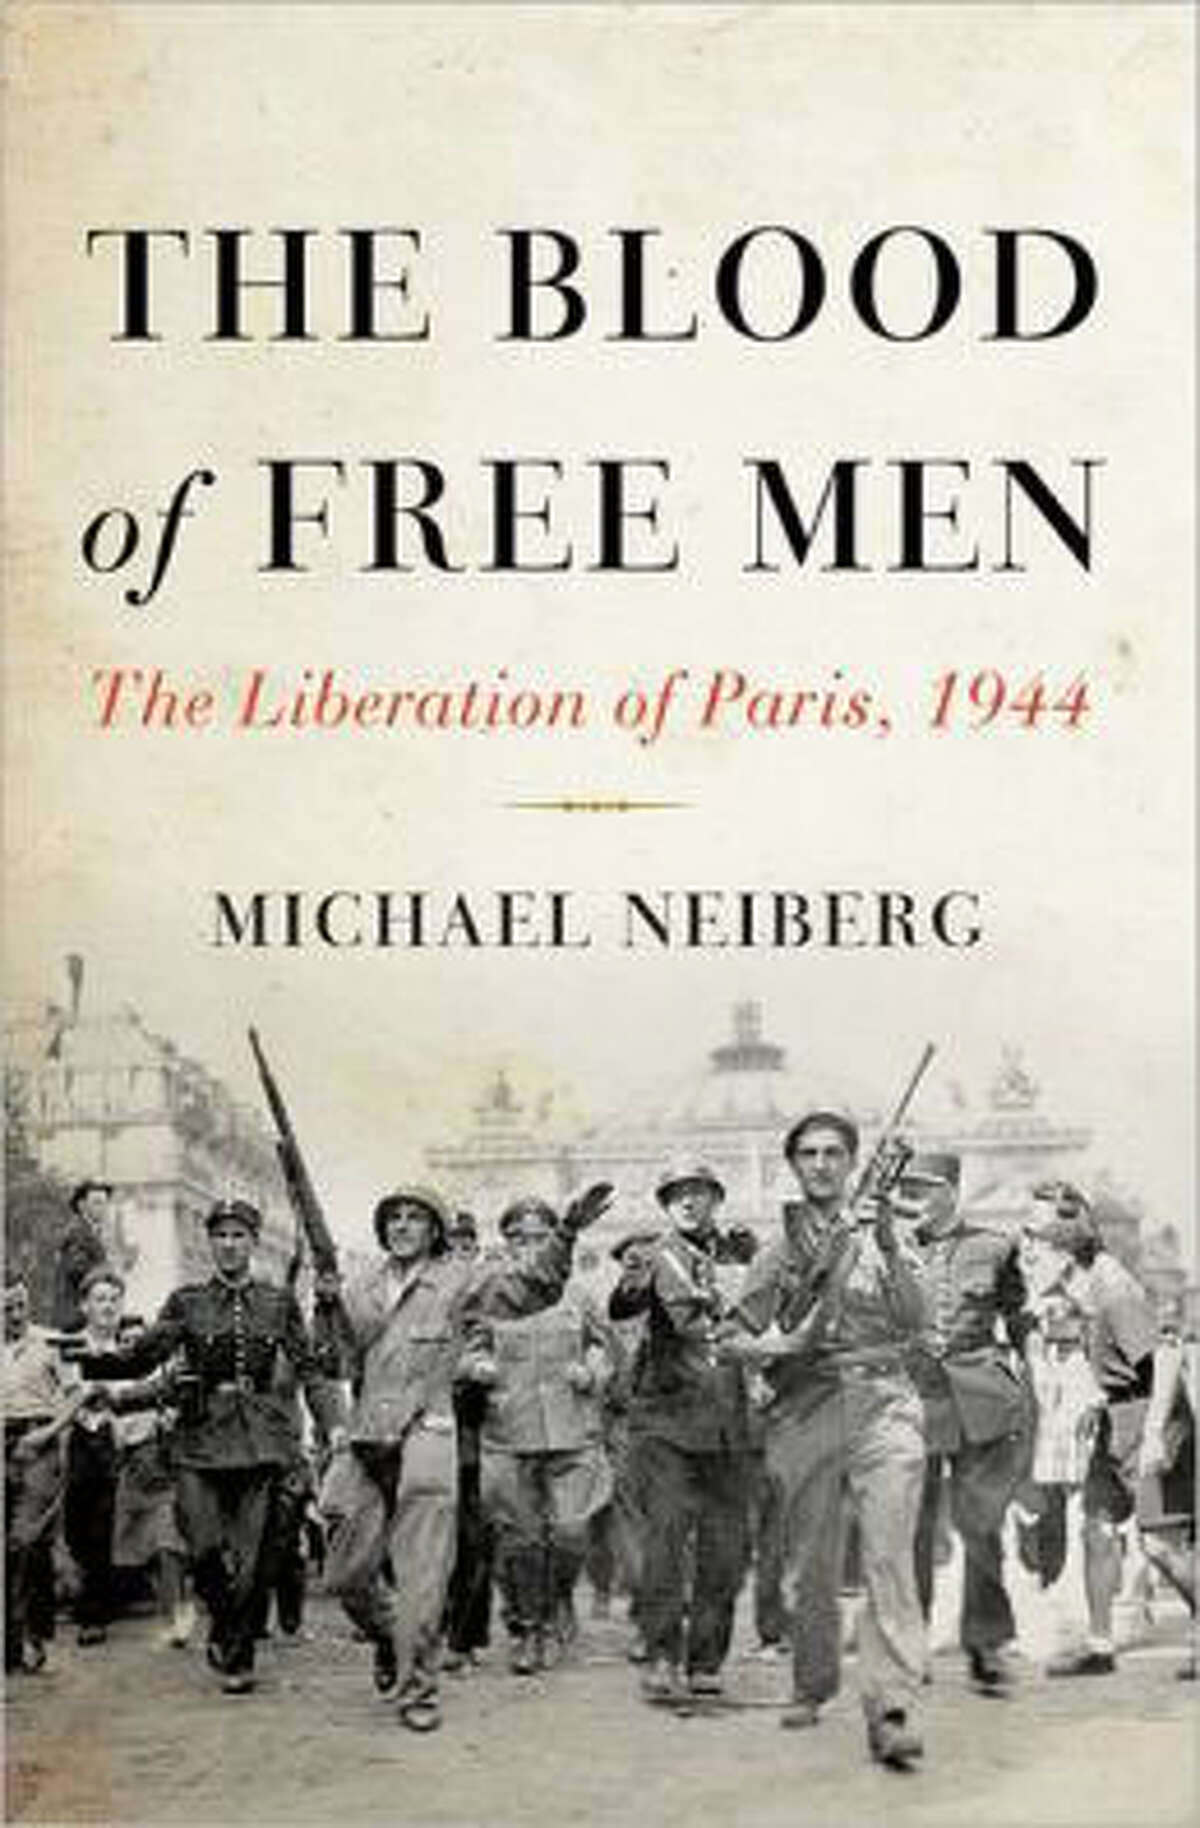 In “The Blood of Free Men: The Liberation of Paris, 1944,” award-winning historian Michael Neiberg offers a fascinating look into how ordinary Parisians reclaimed the world’s shattered cultural capital through urban warfare, cunning diplomacy and last minute aid from the Allies, to wrestle the city away from its German stronghold, dramatically setting into motion the end of World War II on the European front.